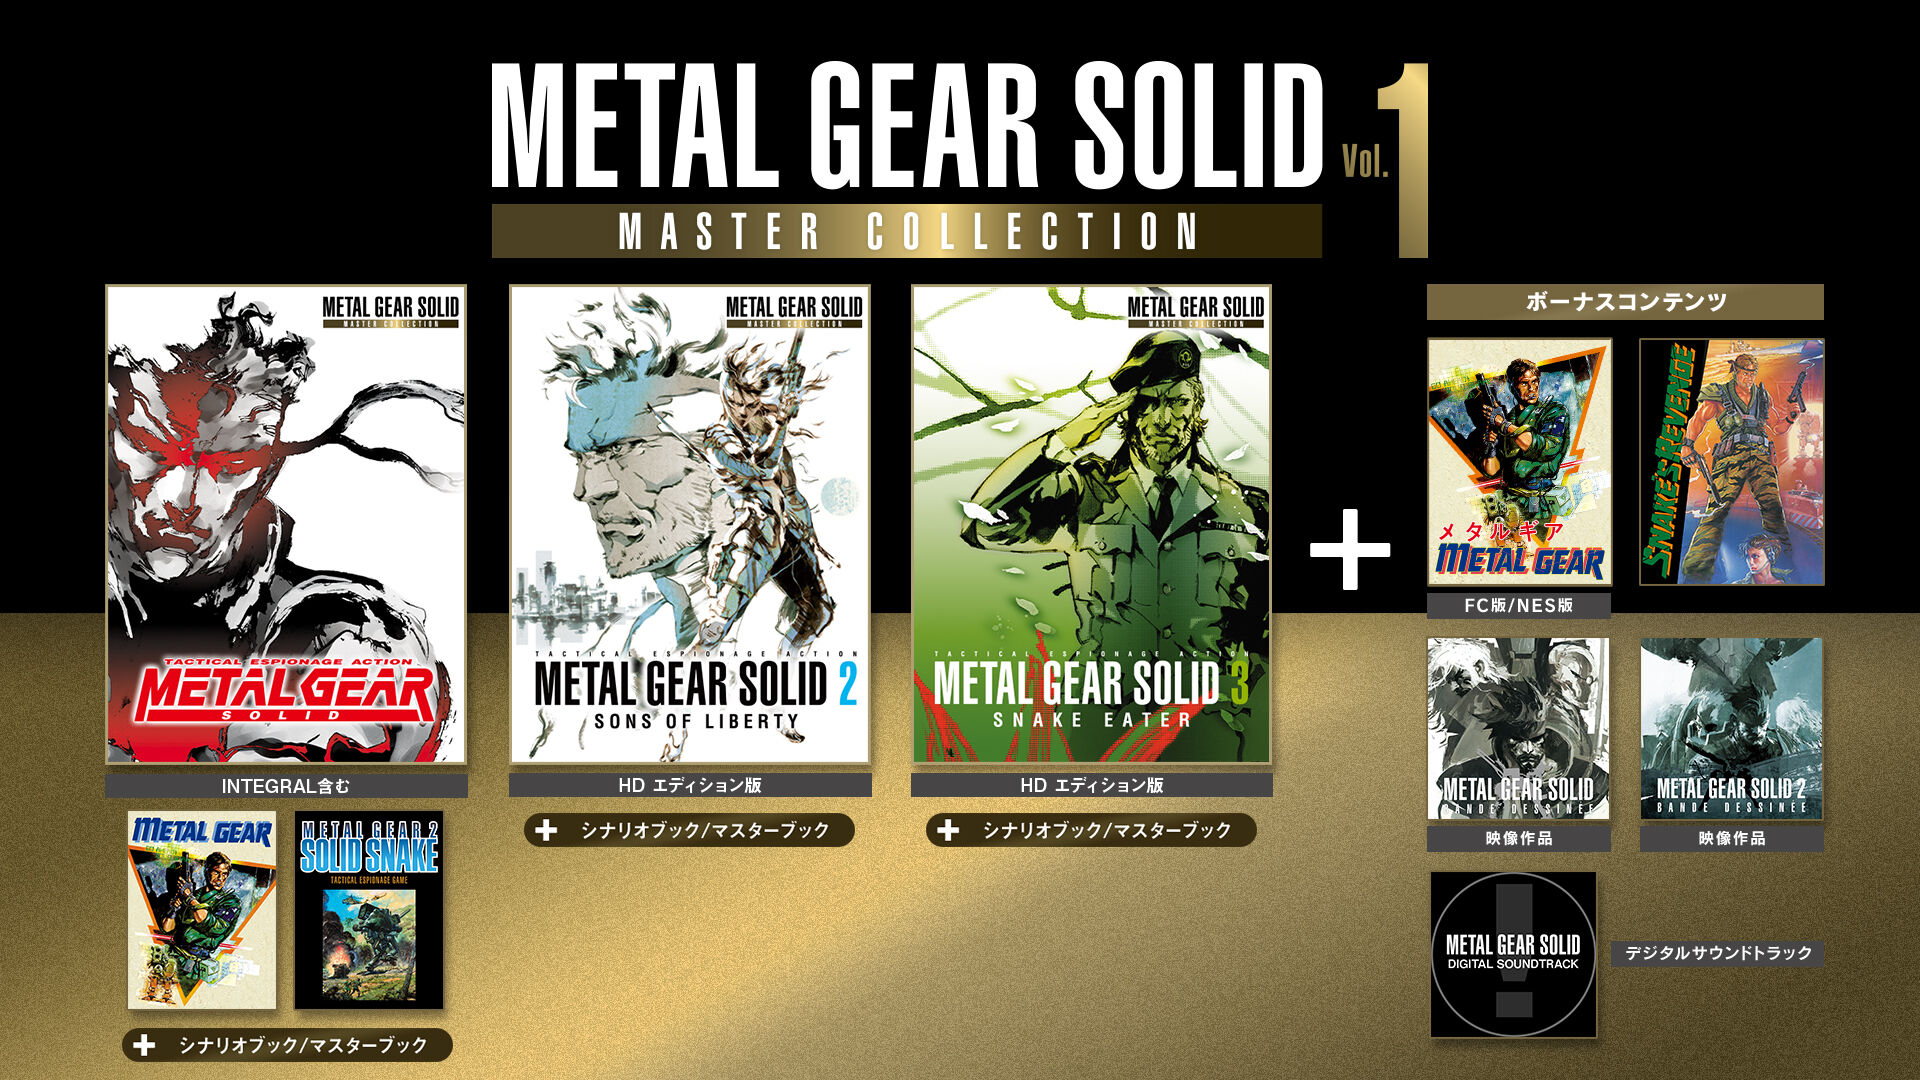 METAL GEAR SOLID: MASTER COLLECTION Vol. 1 | My Nintendo Store ...